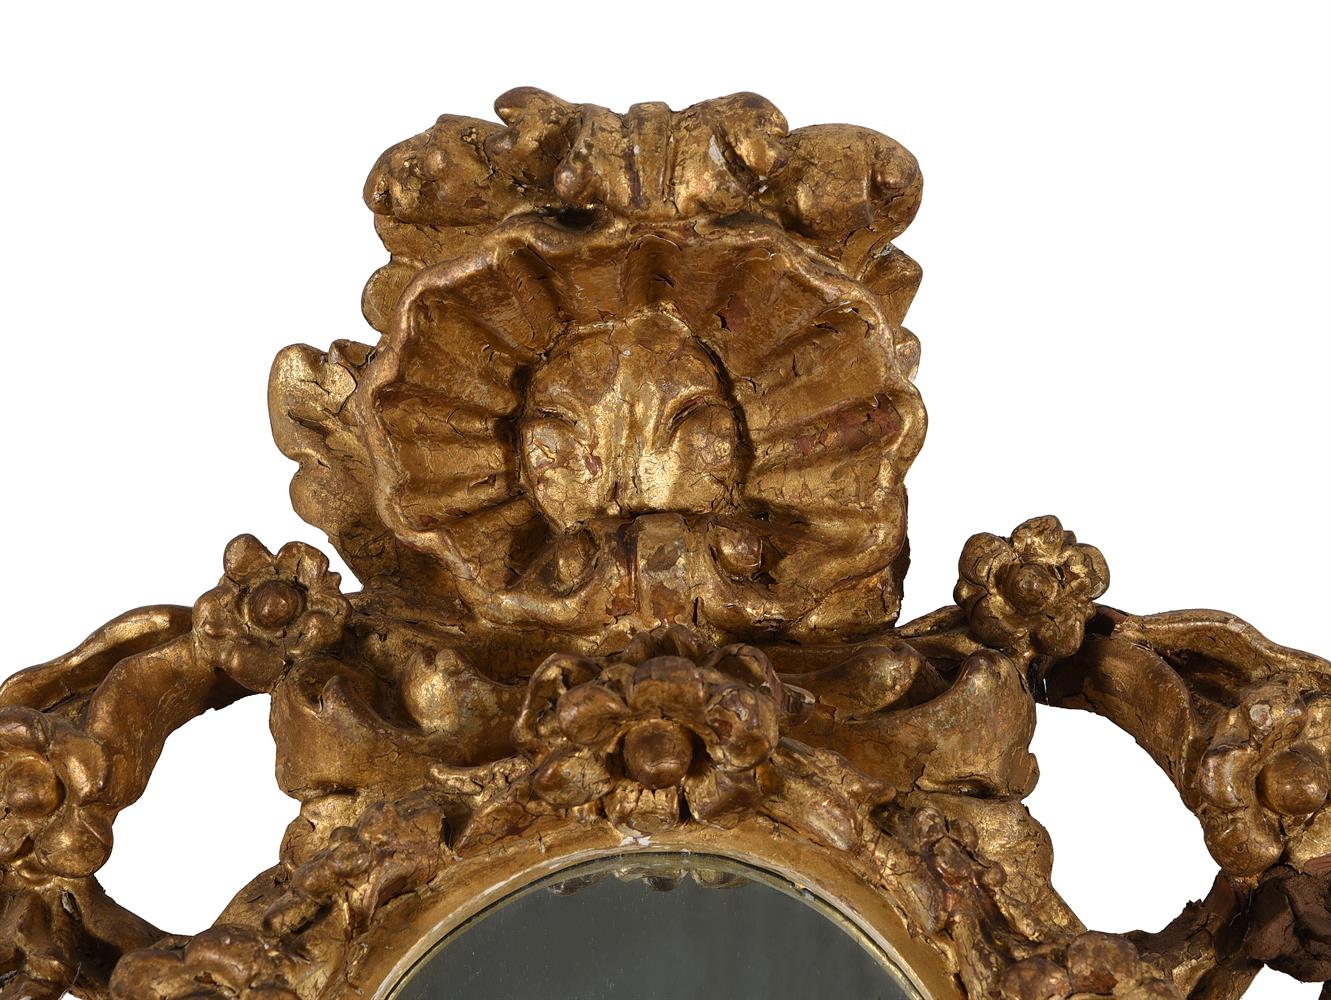 A PAIR OF ITALIAN CARVED GILTWOOD MIRRORS, LATE 18TH OR EARLY 19TH CENTURY - Image 5 of 7